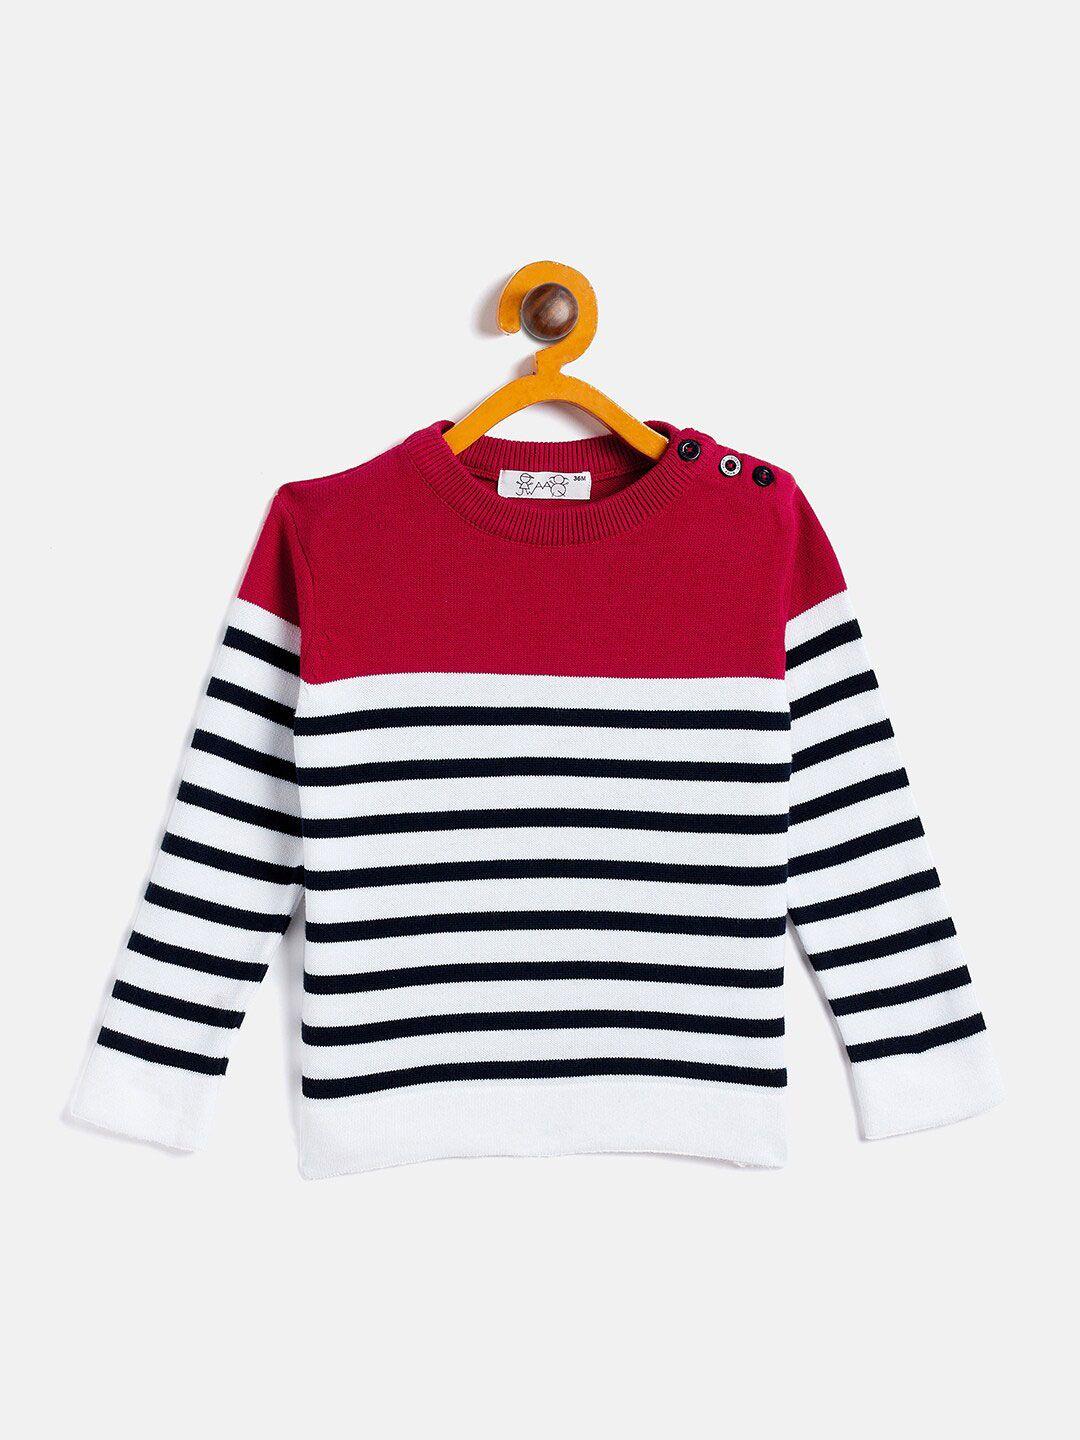 jwaaq unisex kids red & white striped pullover